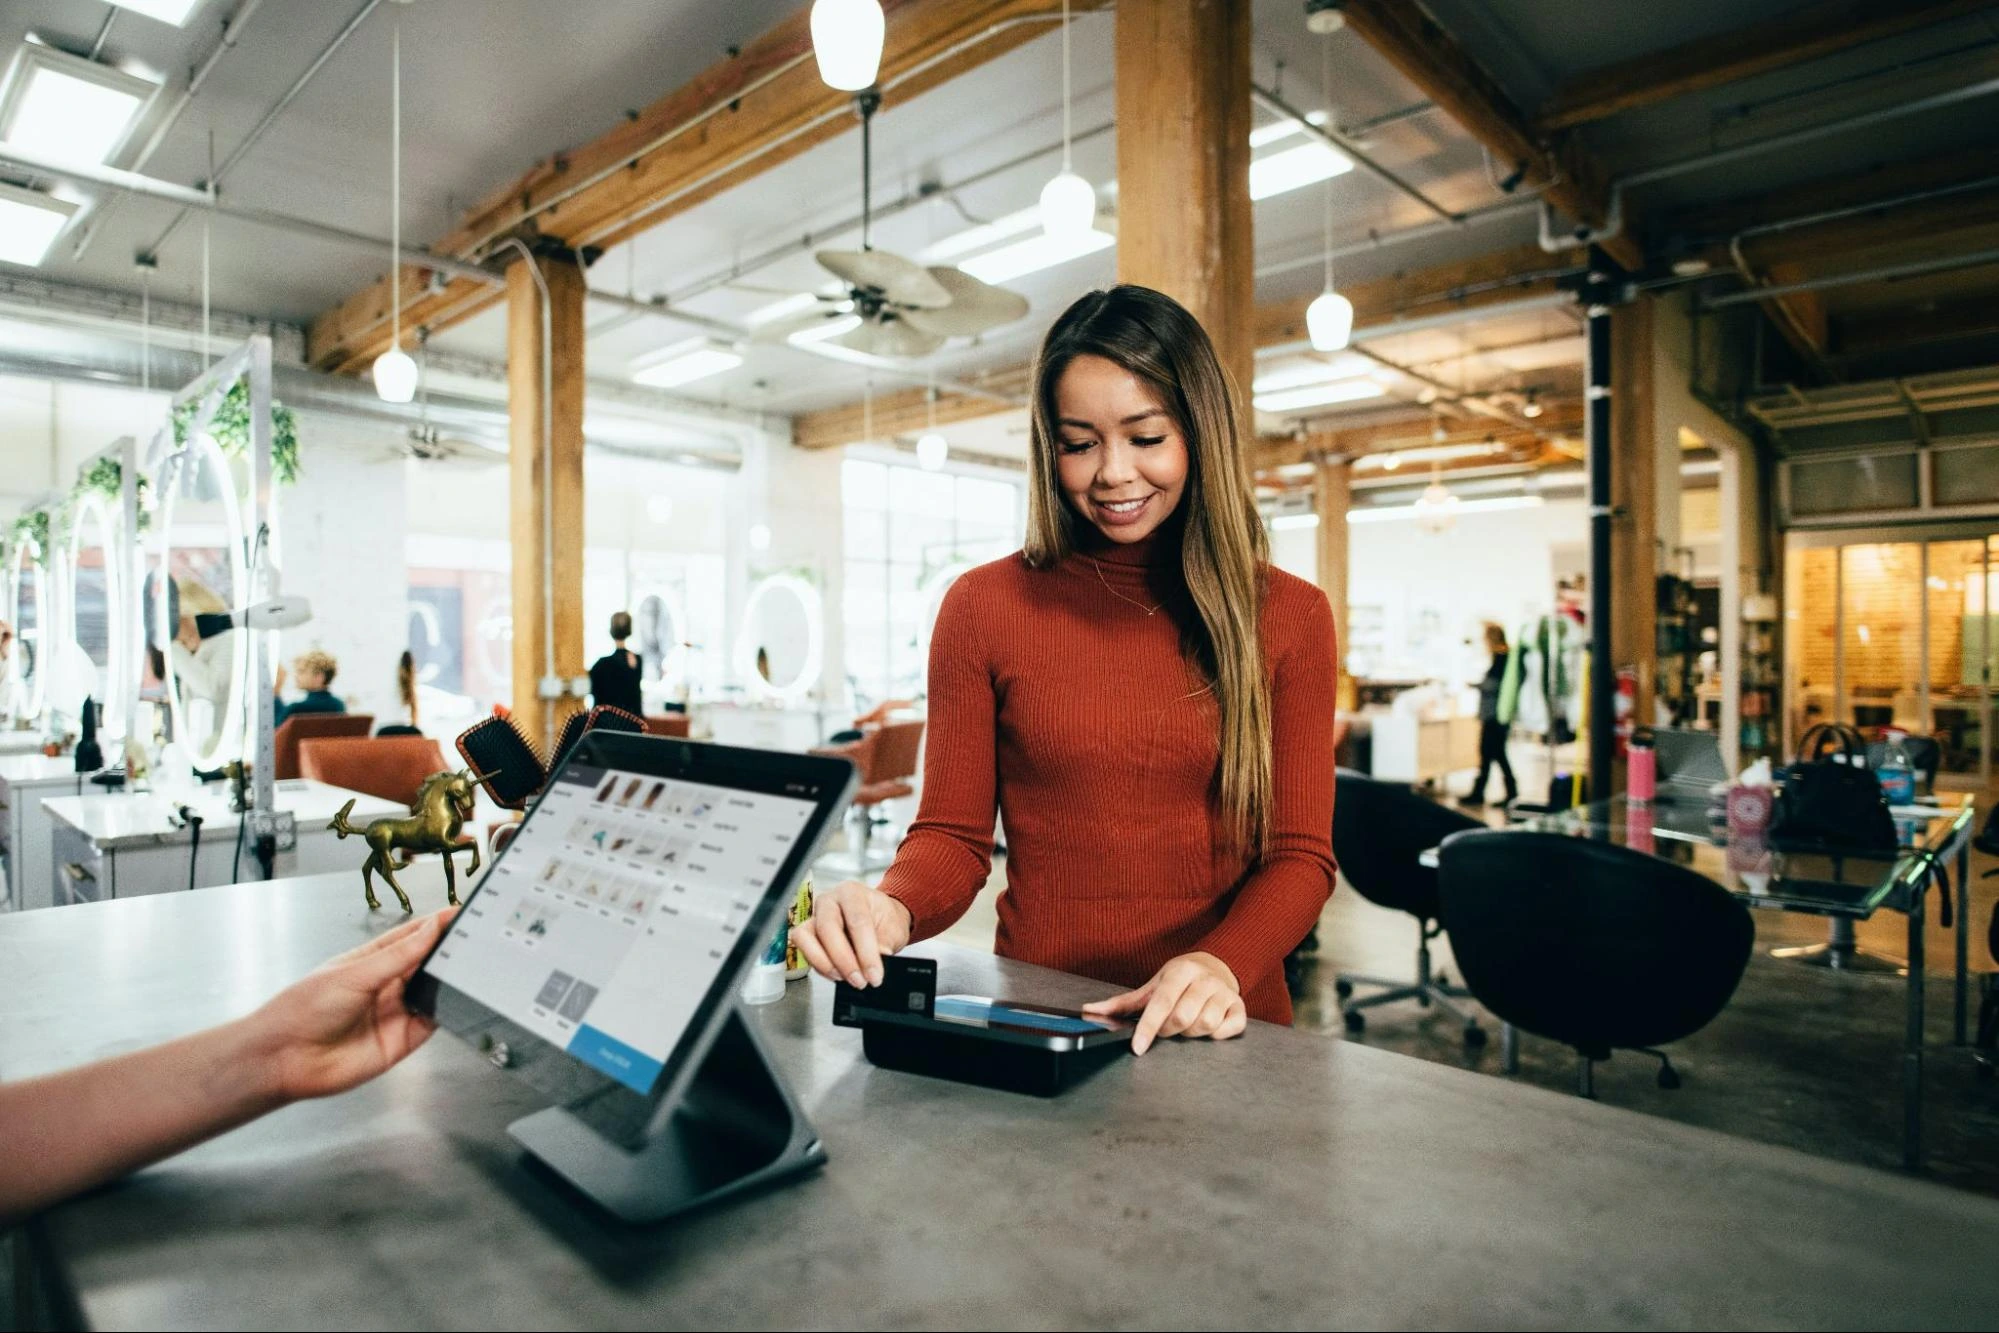  implement automatic gratuity in your restaurant